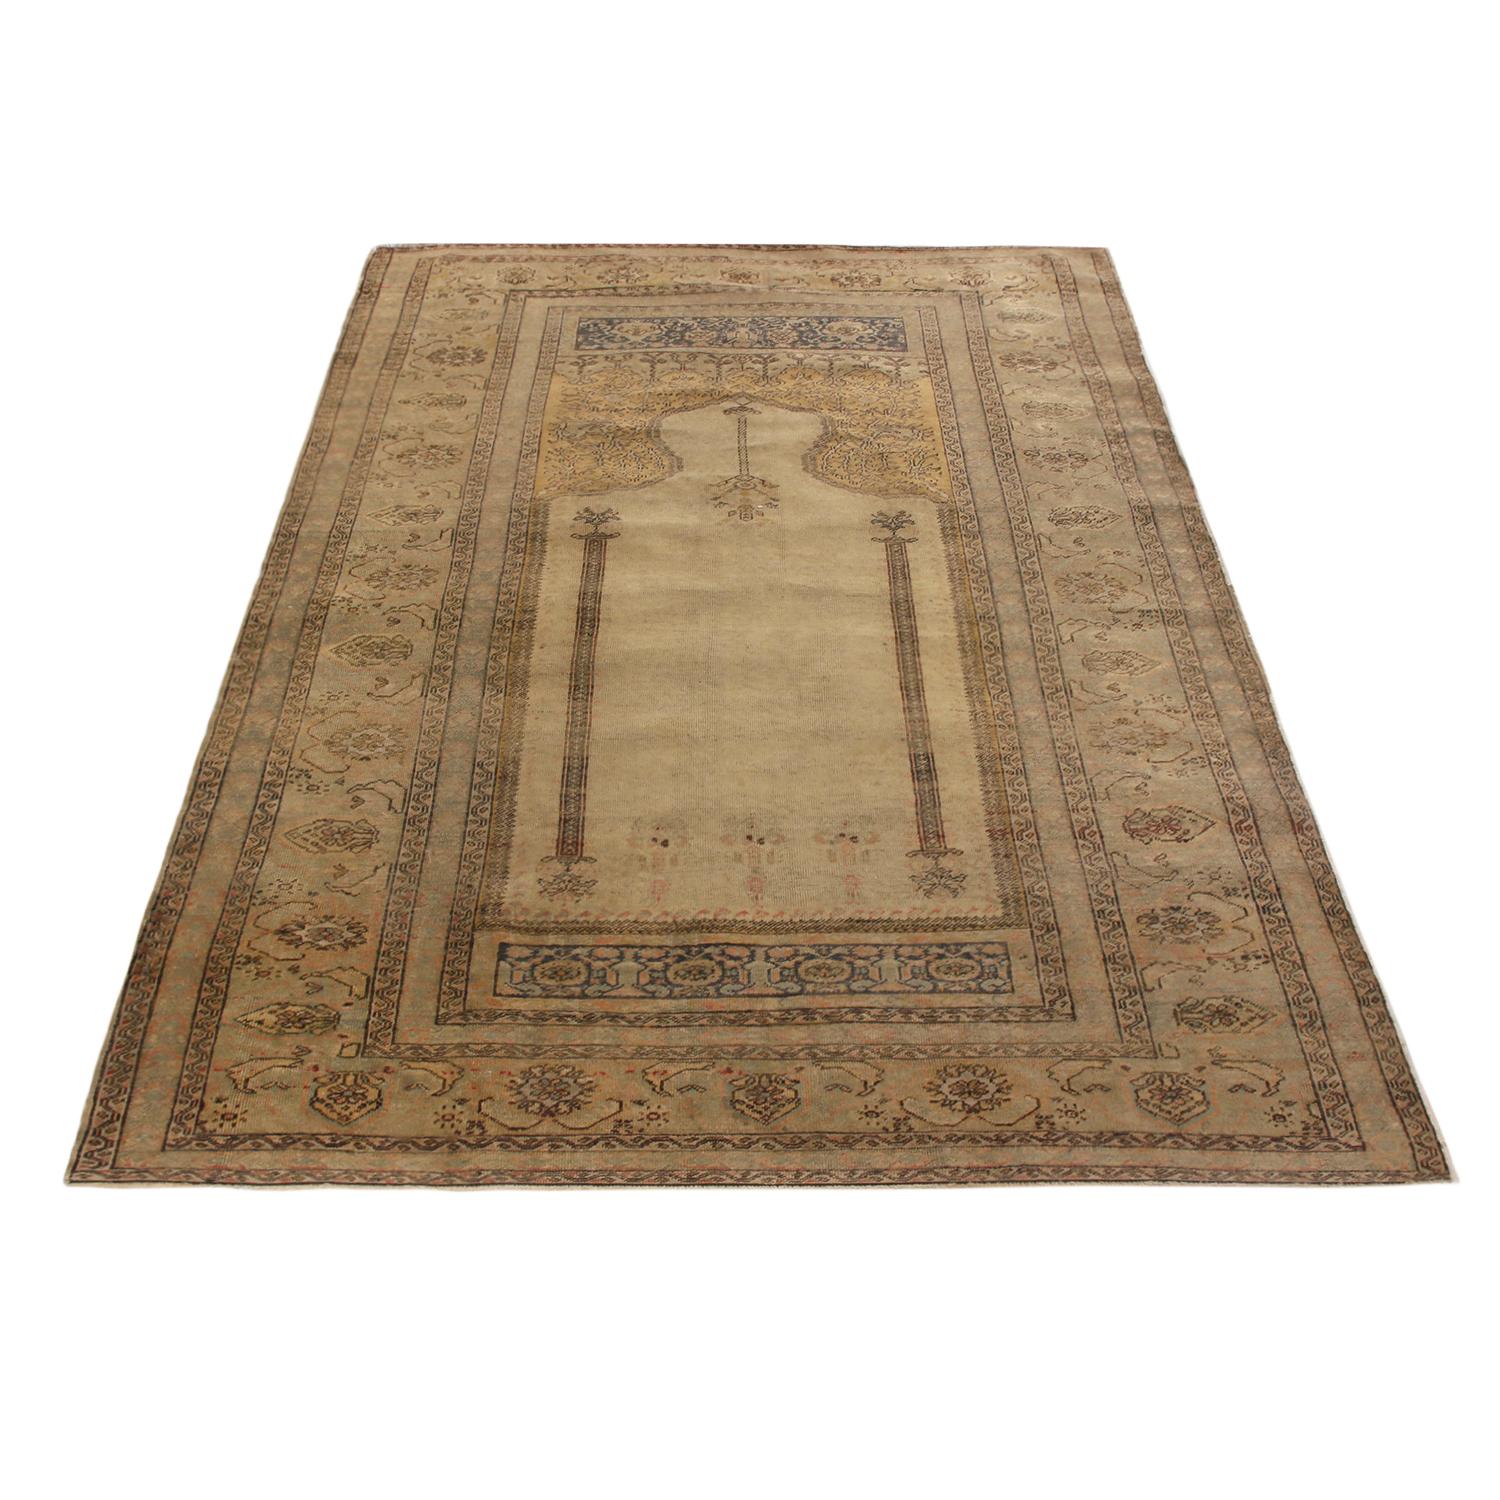 Hand knotted in high-quality wool originating from Turkey in 1870, this antique Kayseri rug enjoys an inviting, luminous shade of beige complementing more vibrant golden-yellow and blue accents, balancing the visual gravity of the central Mihrab